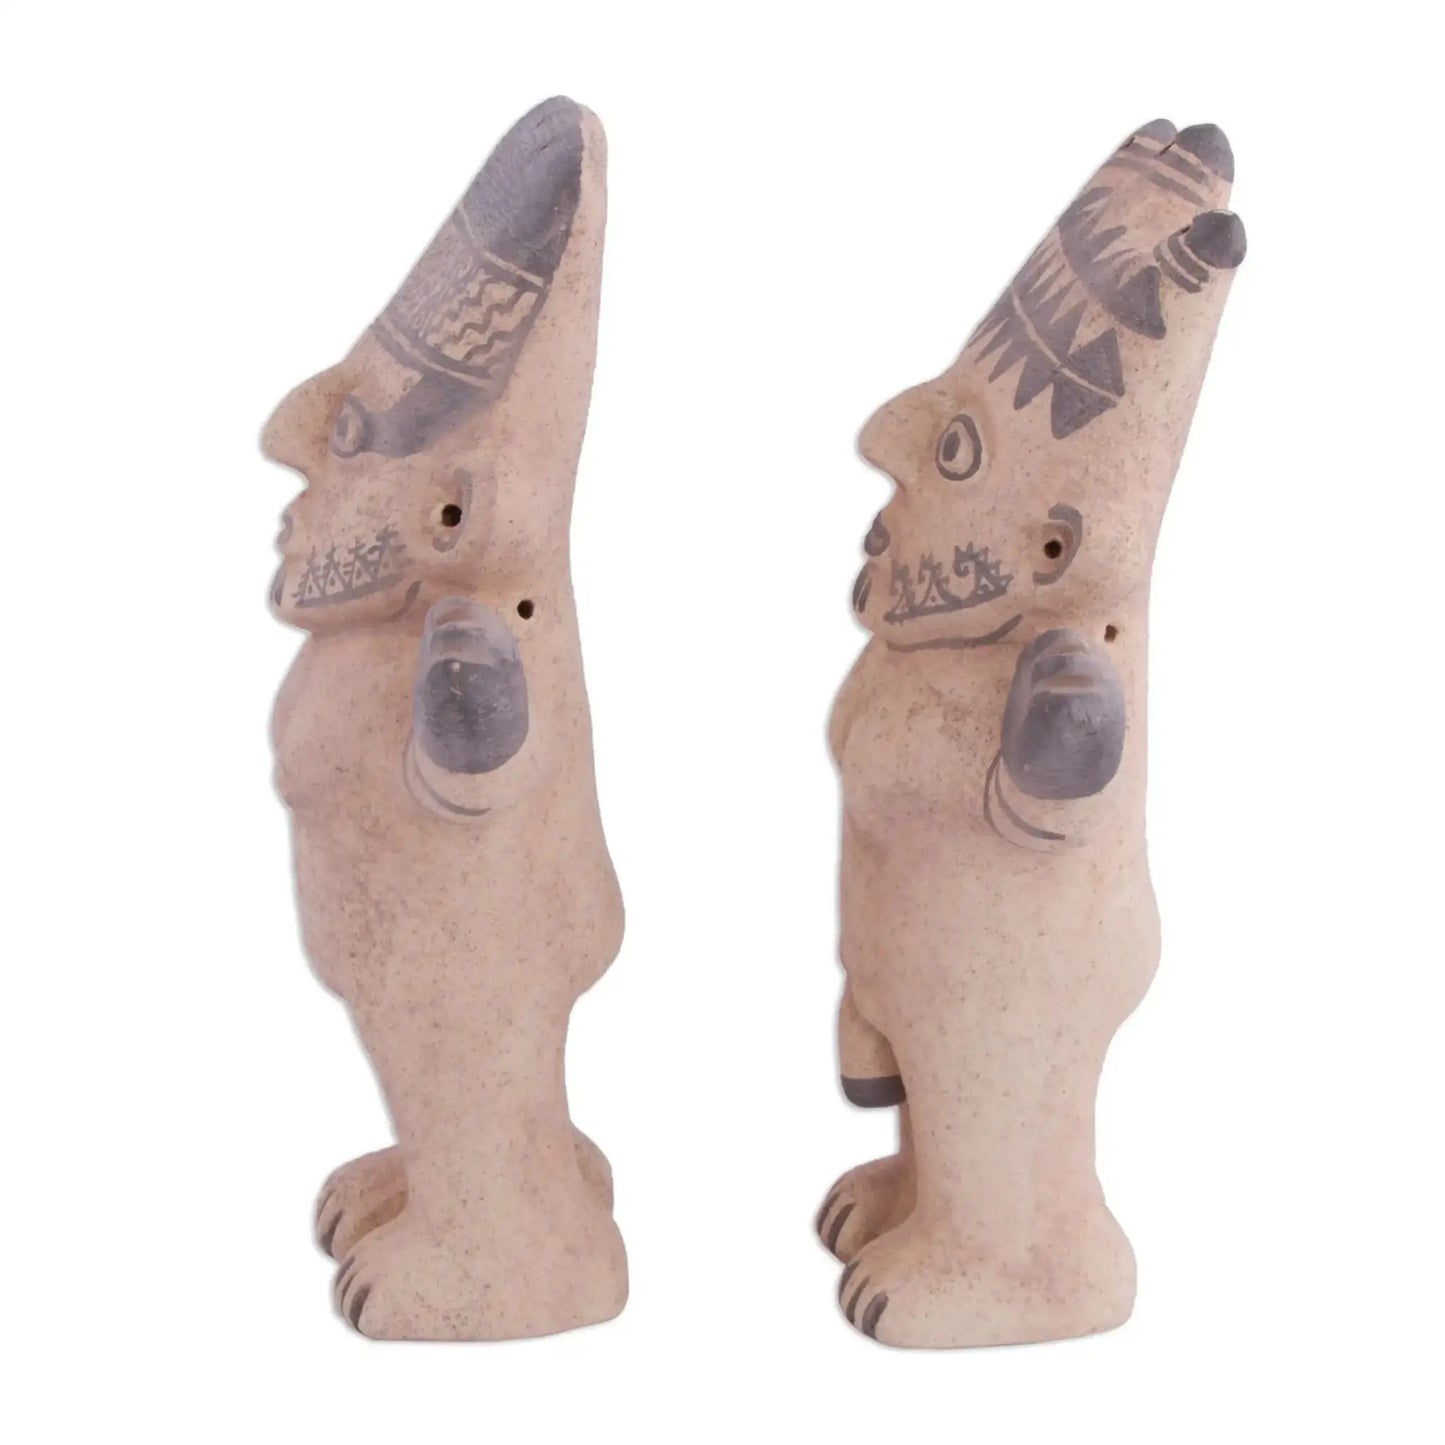 Male and Female Chancay Duality - Ceramic Replica Sculptures